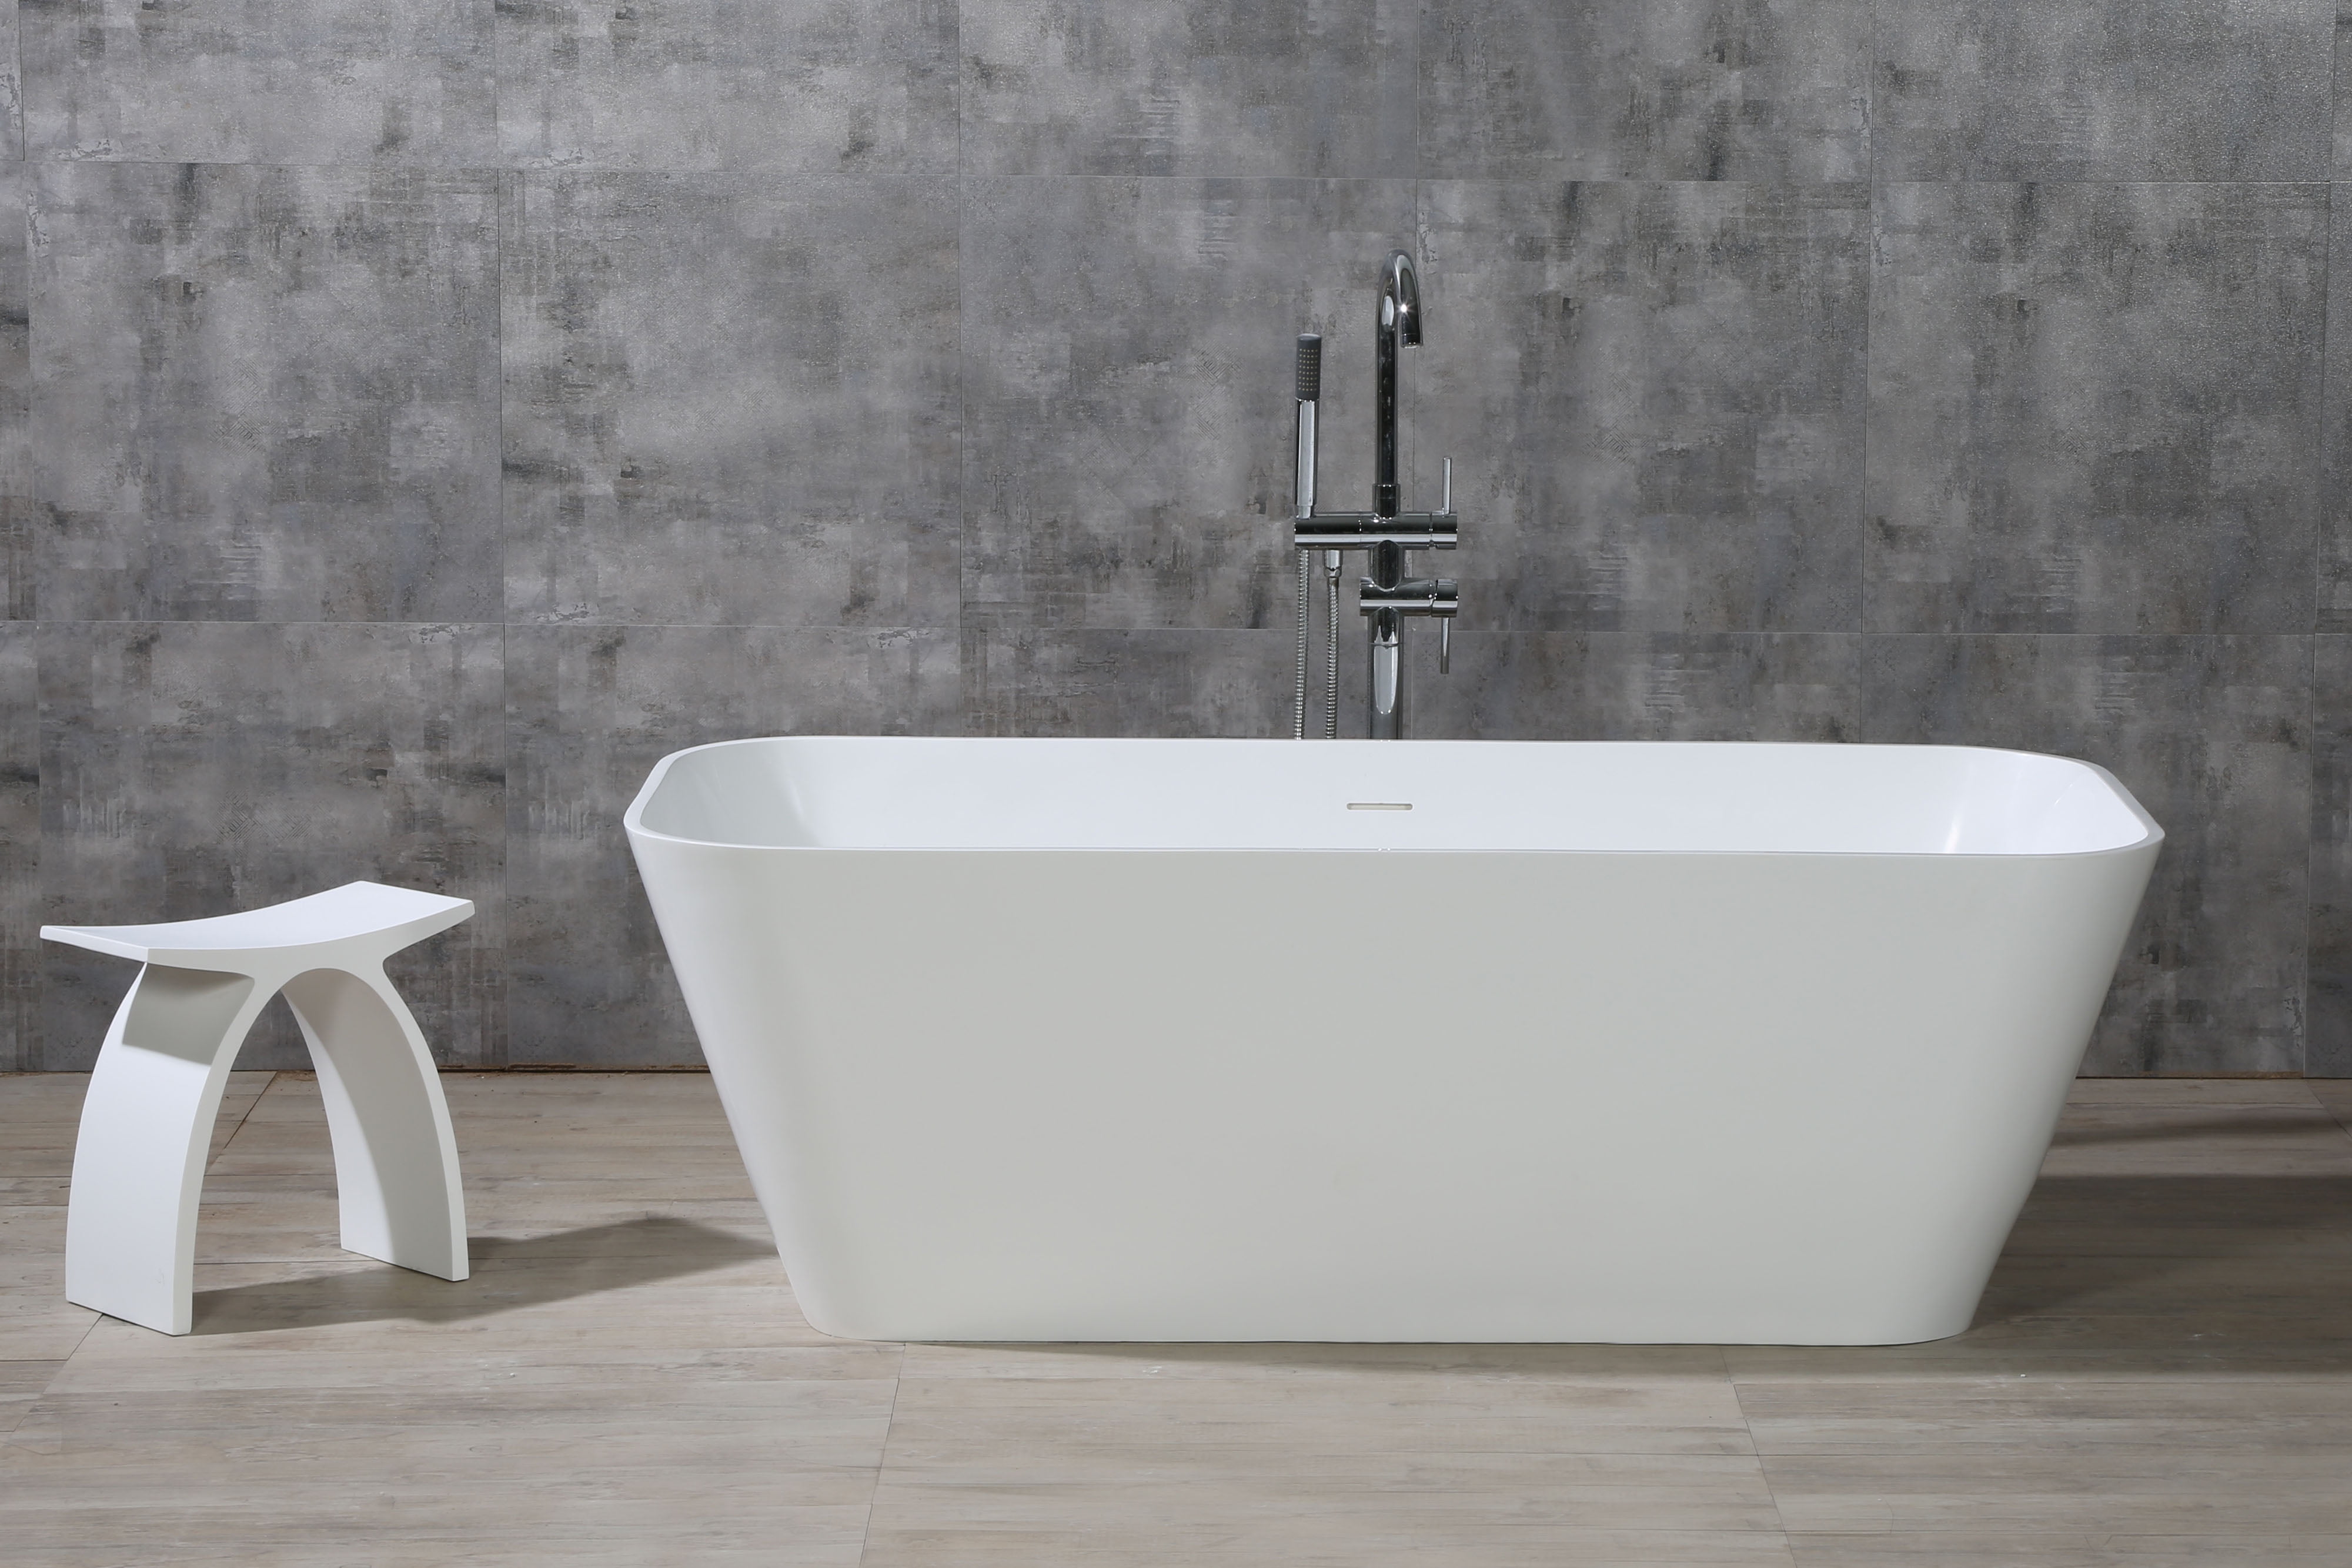 Picture of ALFI brand AB9952 67 in. Rectangular Solid Surface Smooth Resin Soaking Bathtub, White